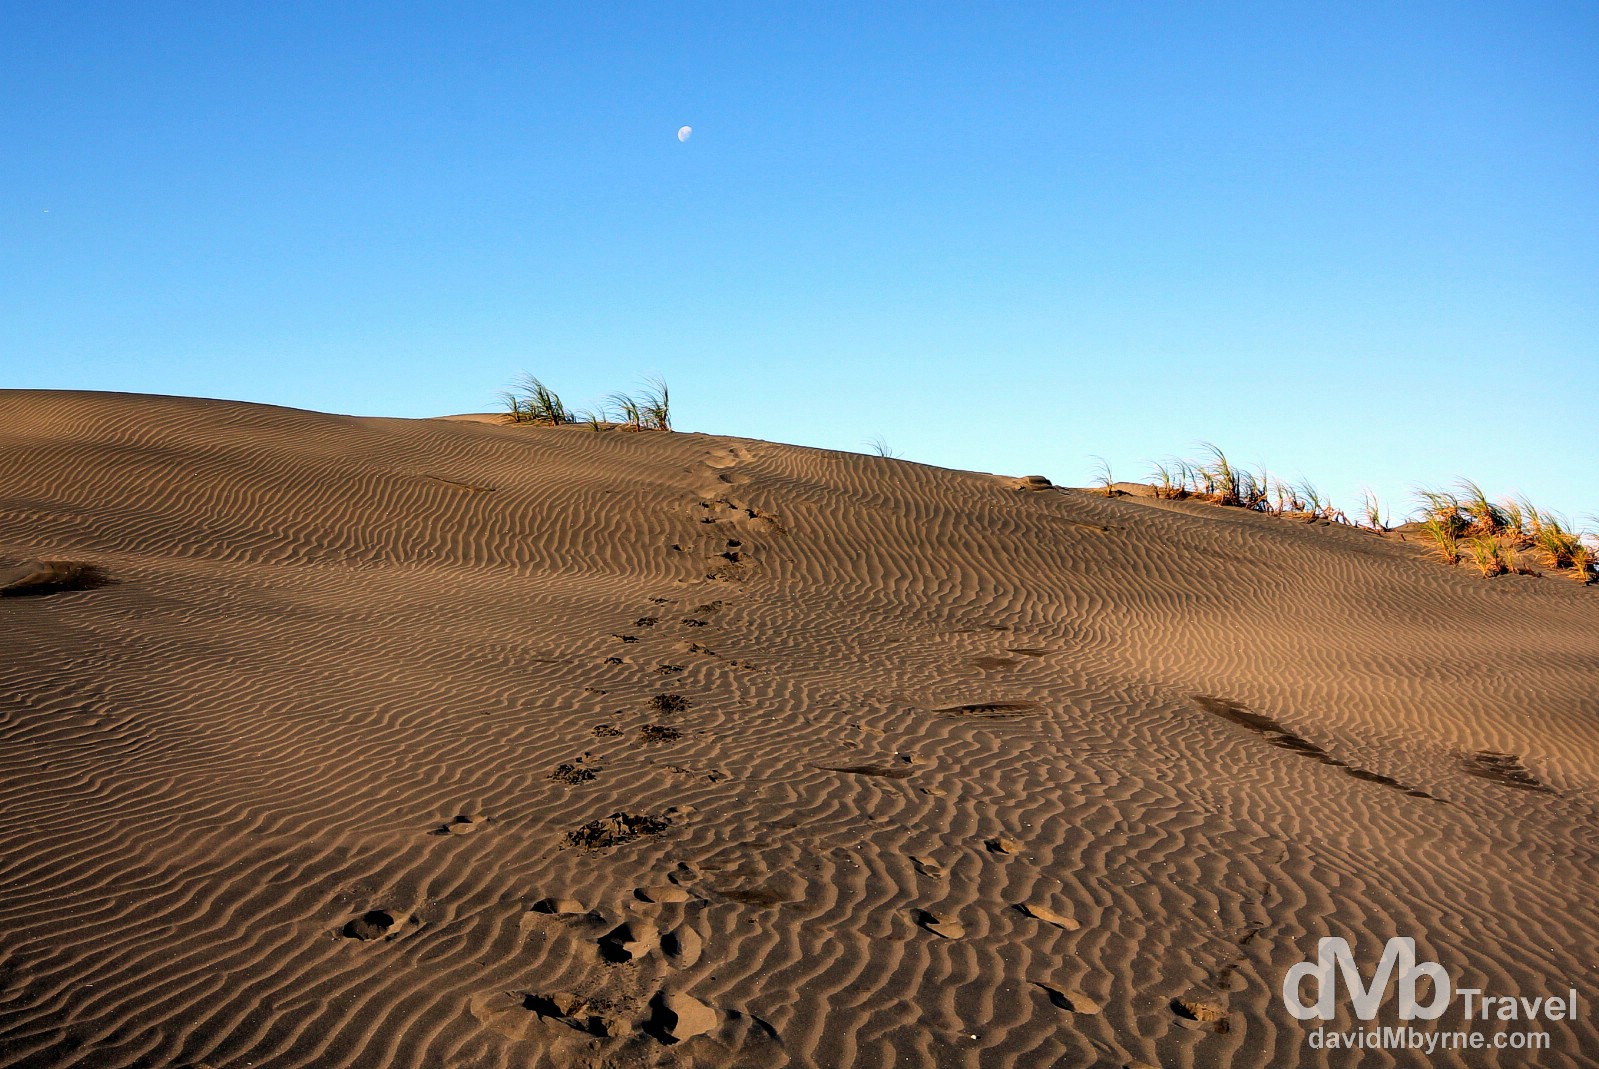 Footsteps in the mammoth sand dunes of Port Waikato, North Island, New Zealand. May 2nd 2012.